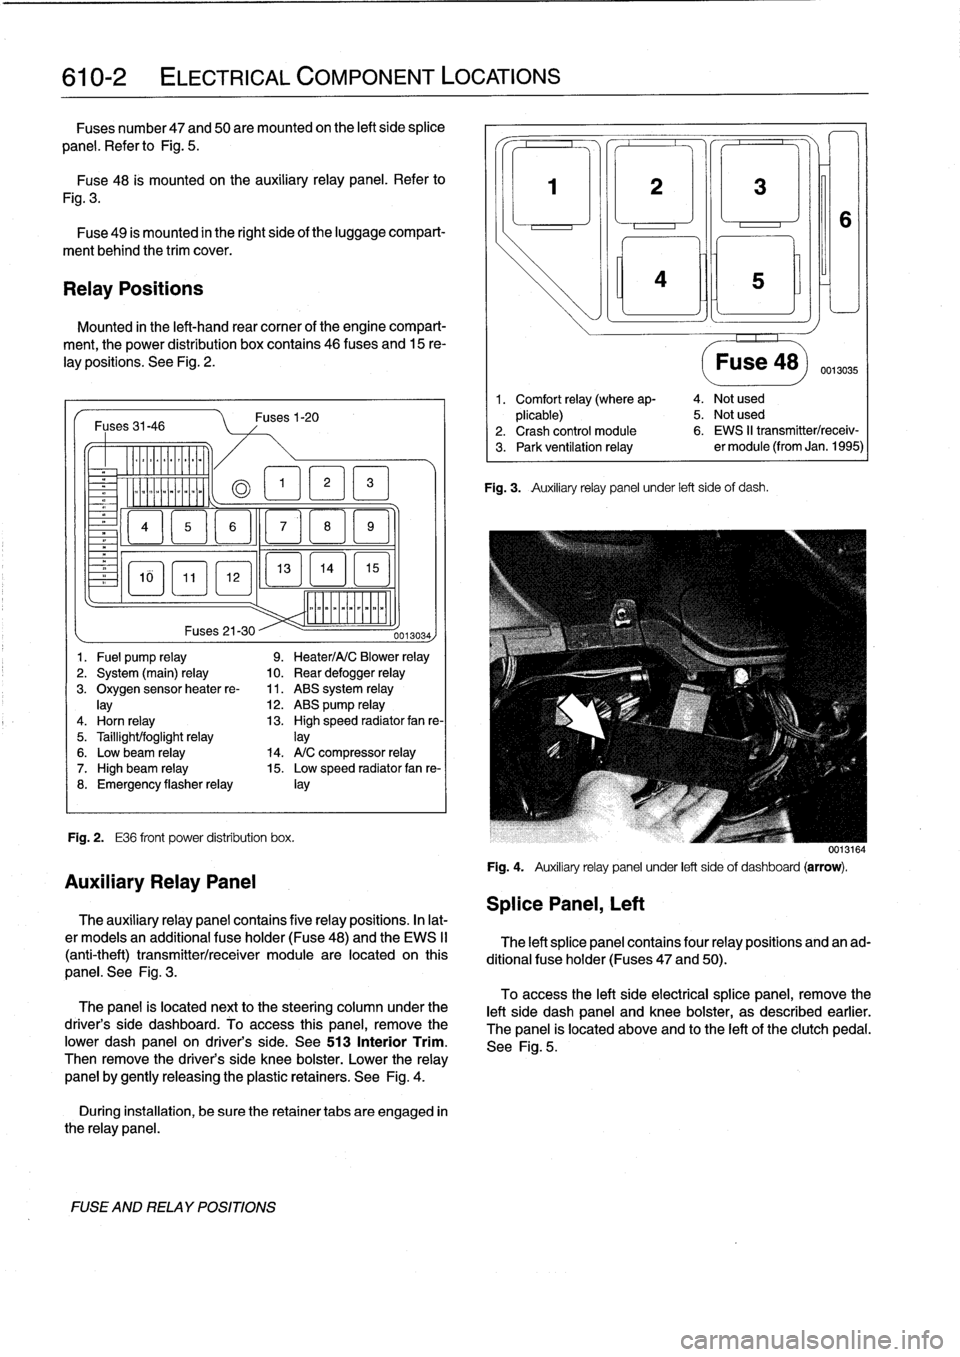 BMW 318i 1998 E36 Workshop Manual 
610-2

	

ELECTRICAL
COMPONENT
LOCATIONS

Fuses
number47
and
50are
mounted
on
the
left
side
splice

panel
.
Refer
lo
Fig
.
5
.

Fuse48
is
mounted
on
the
auxiliary
relay
panel
.
Refer
to

Fig
.
3
.

F